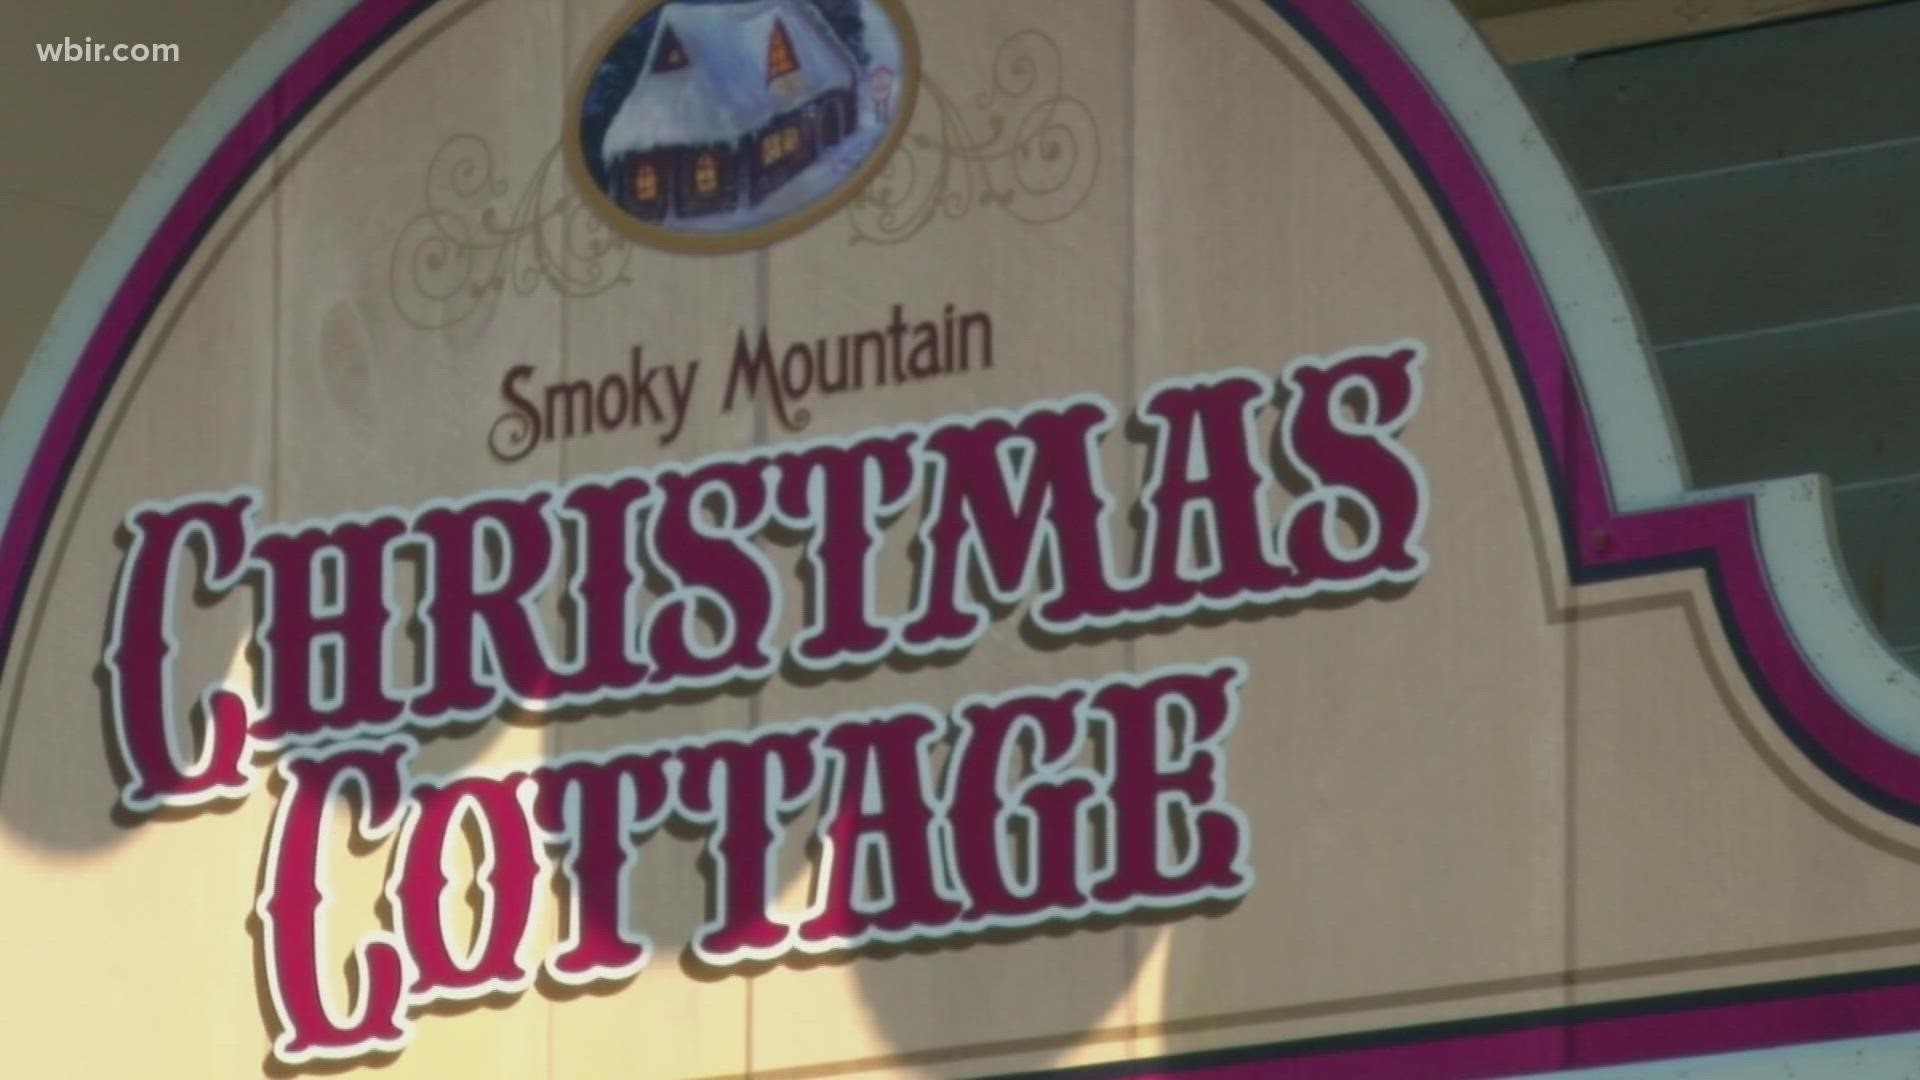 Despite the hot and muggy weather outside, Sevier County is already preparing for its holiday festivities.